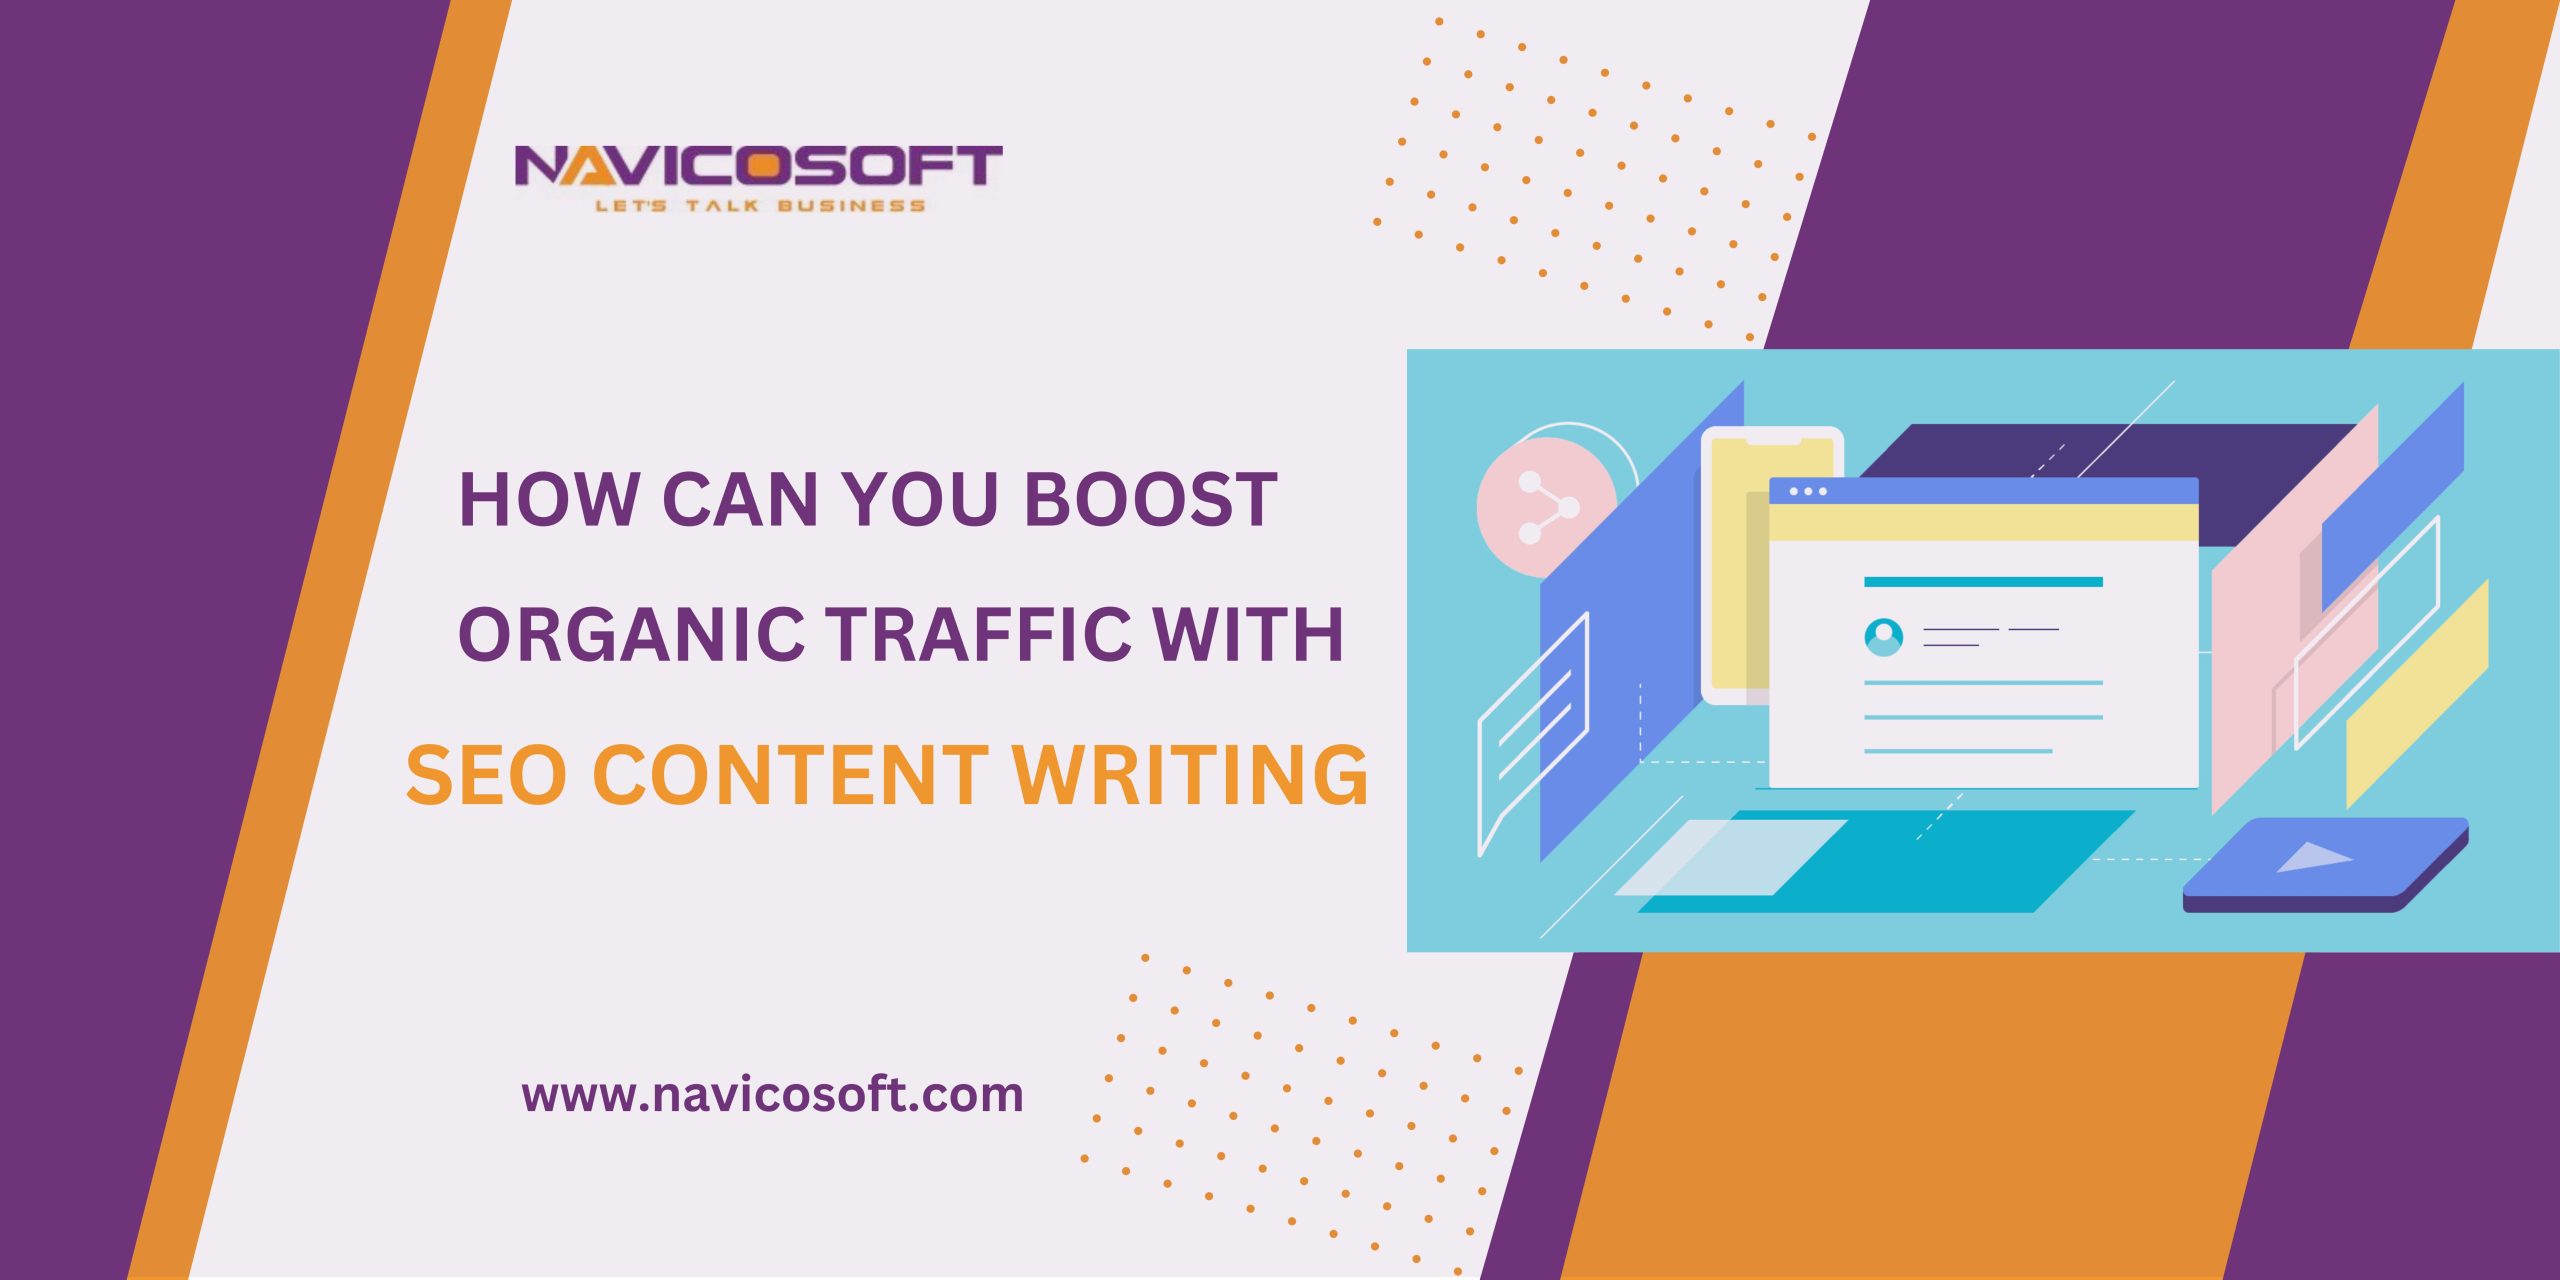 How can you boost organic traffic with SEO content writing